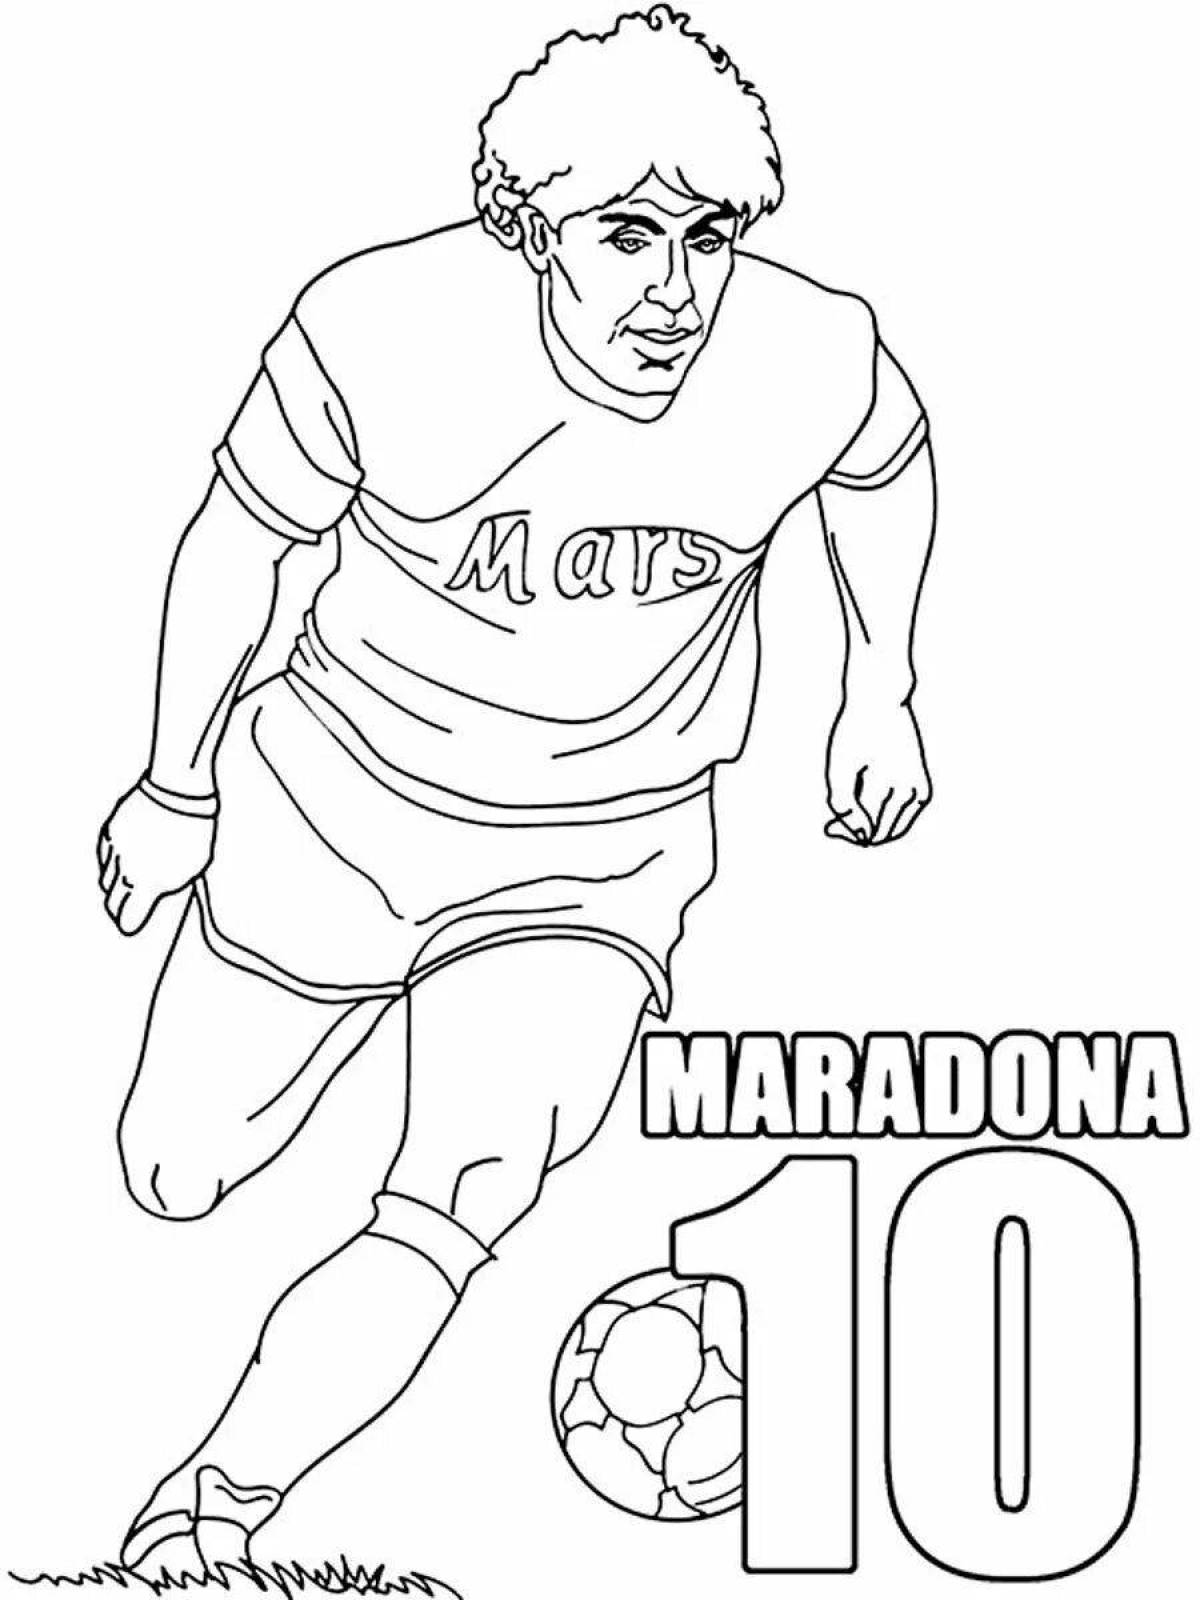 Coloring page funny pele football player